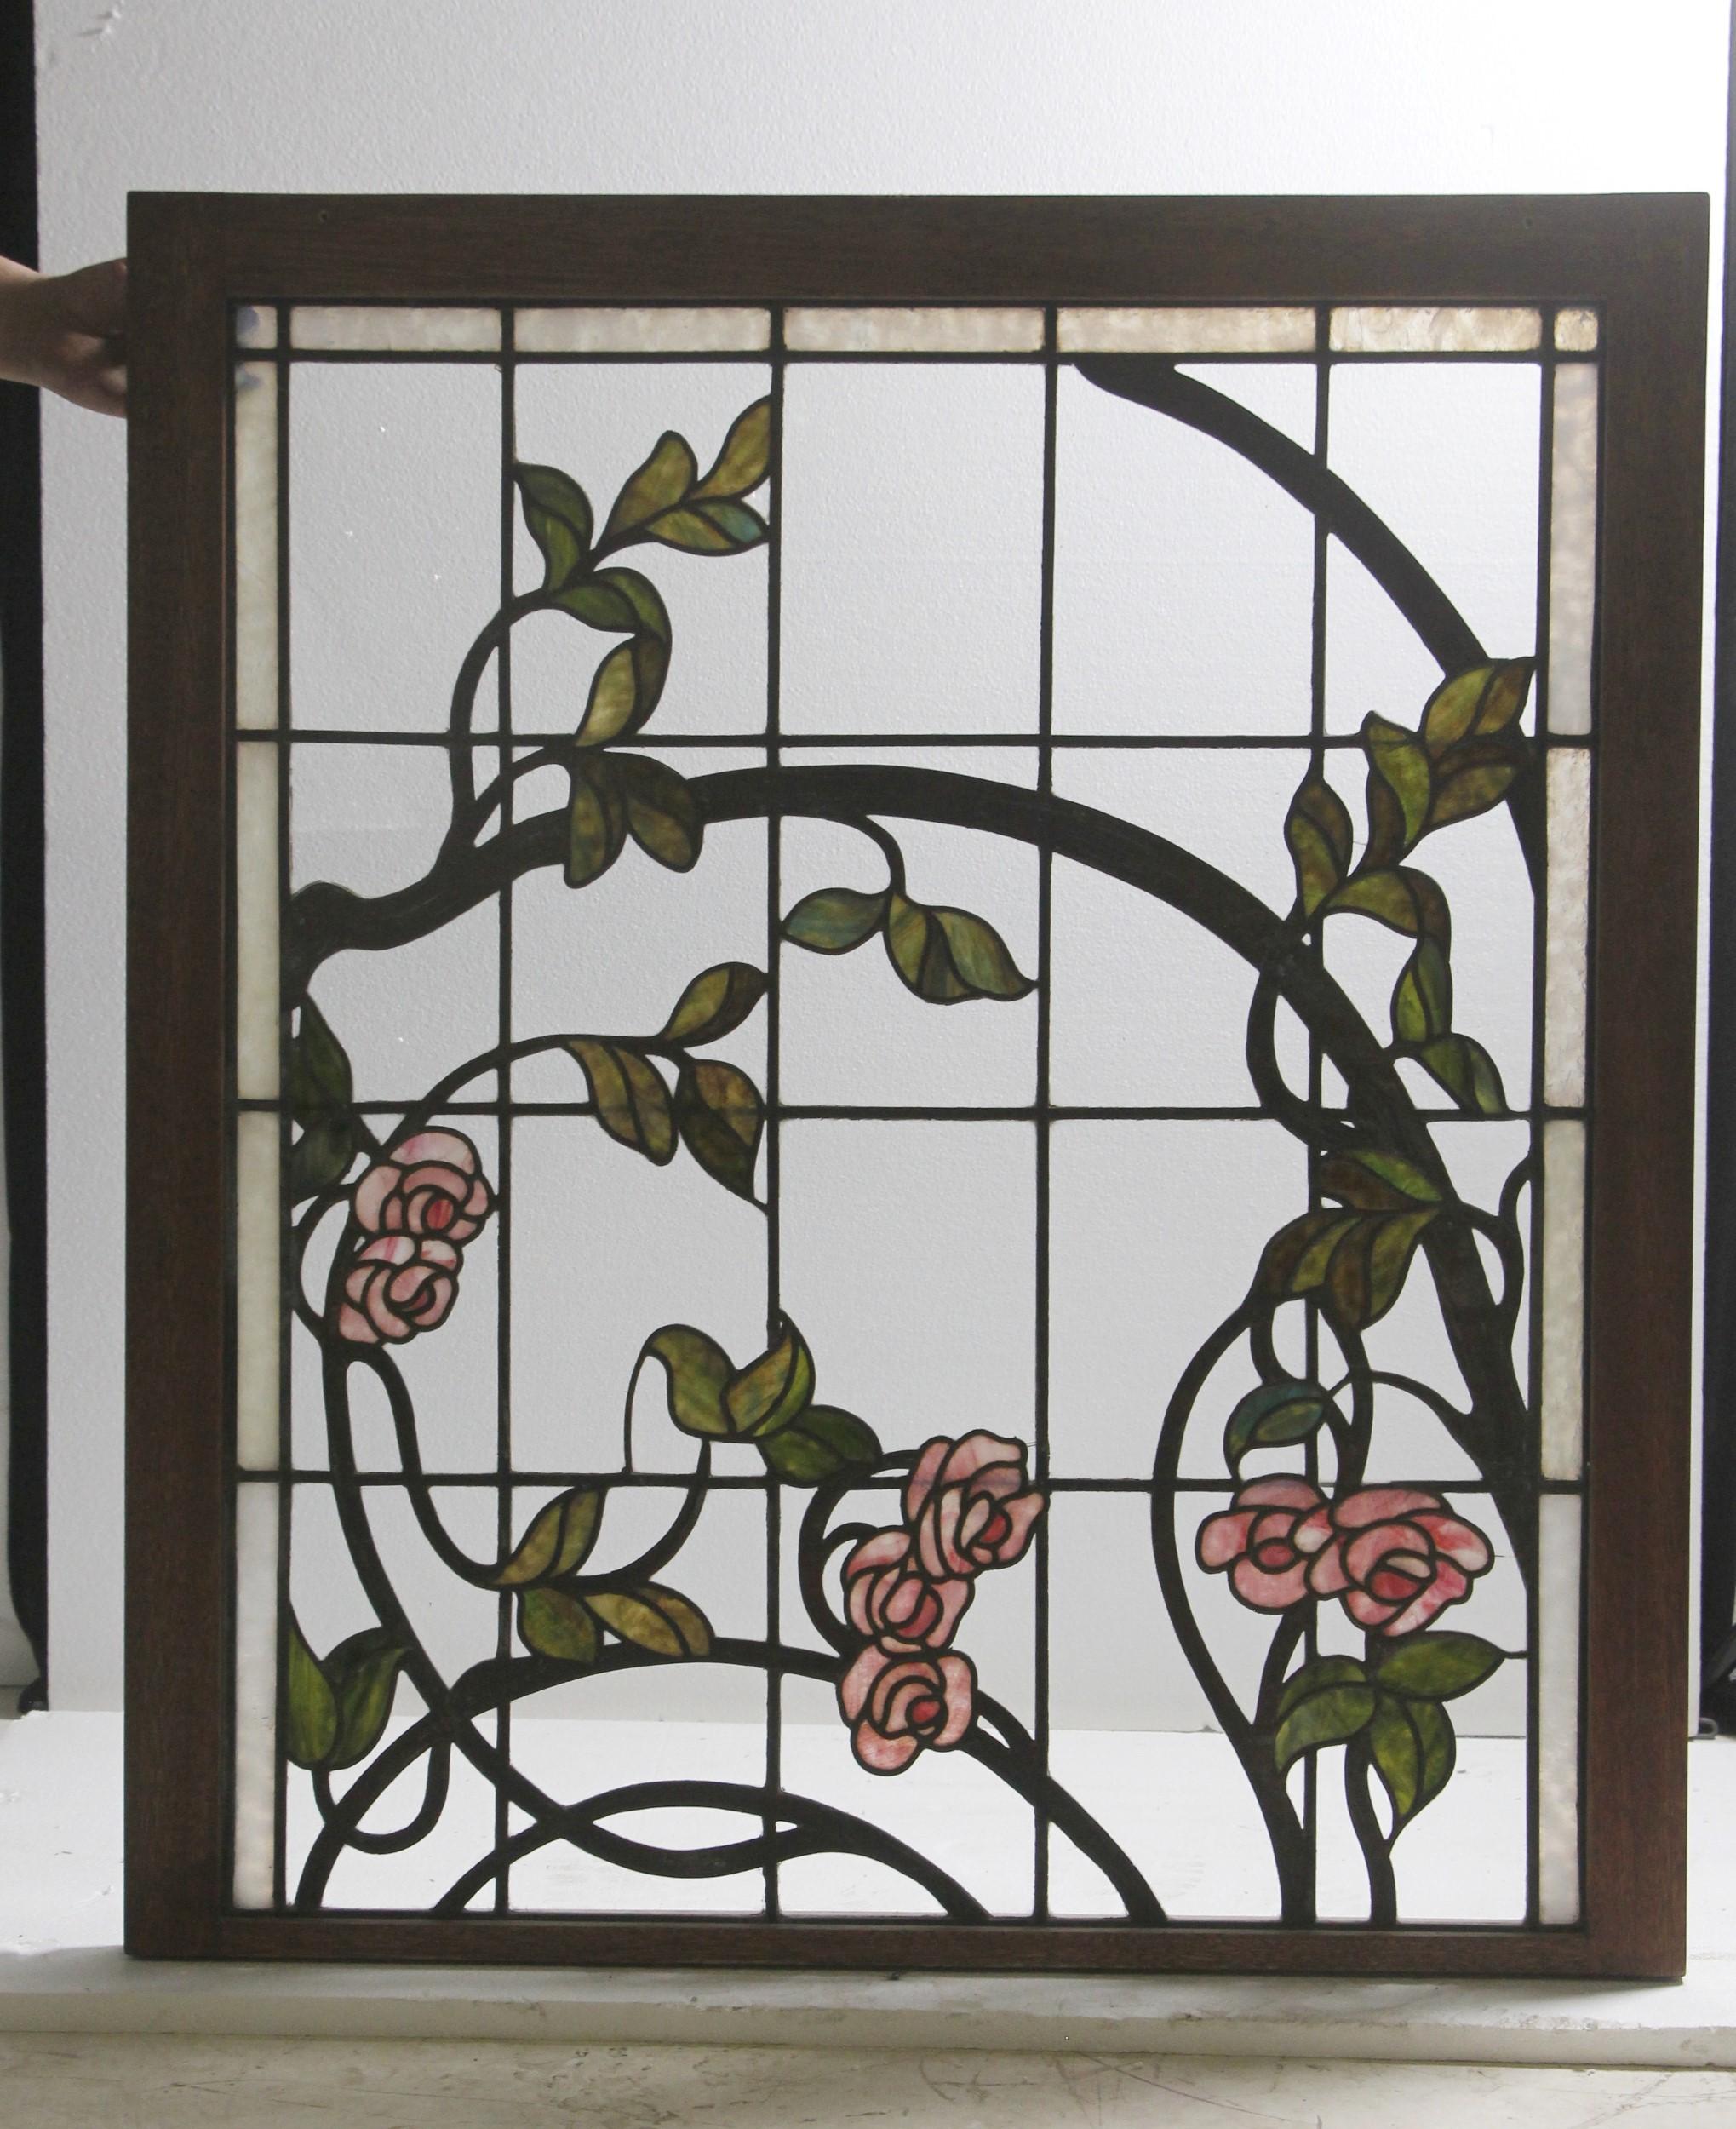 Late 19th Century 1880s Pair Floral Water Lilies Stained Glass Windows Set from a Kentucky Mansion